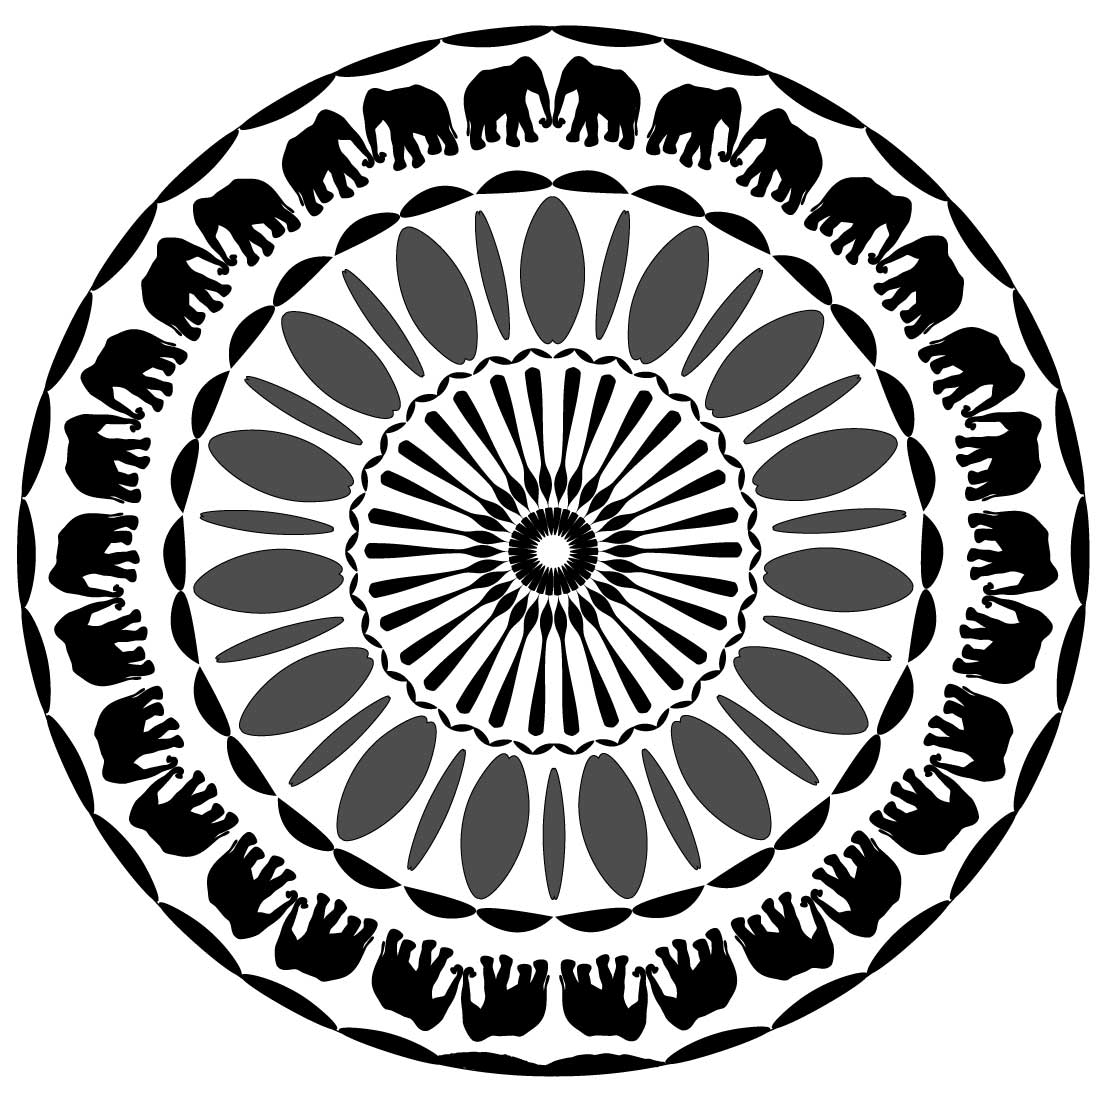 Mandala Art with Elephant in Black and white cover image.